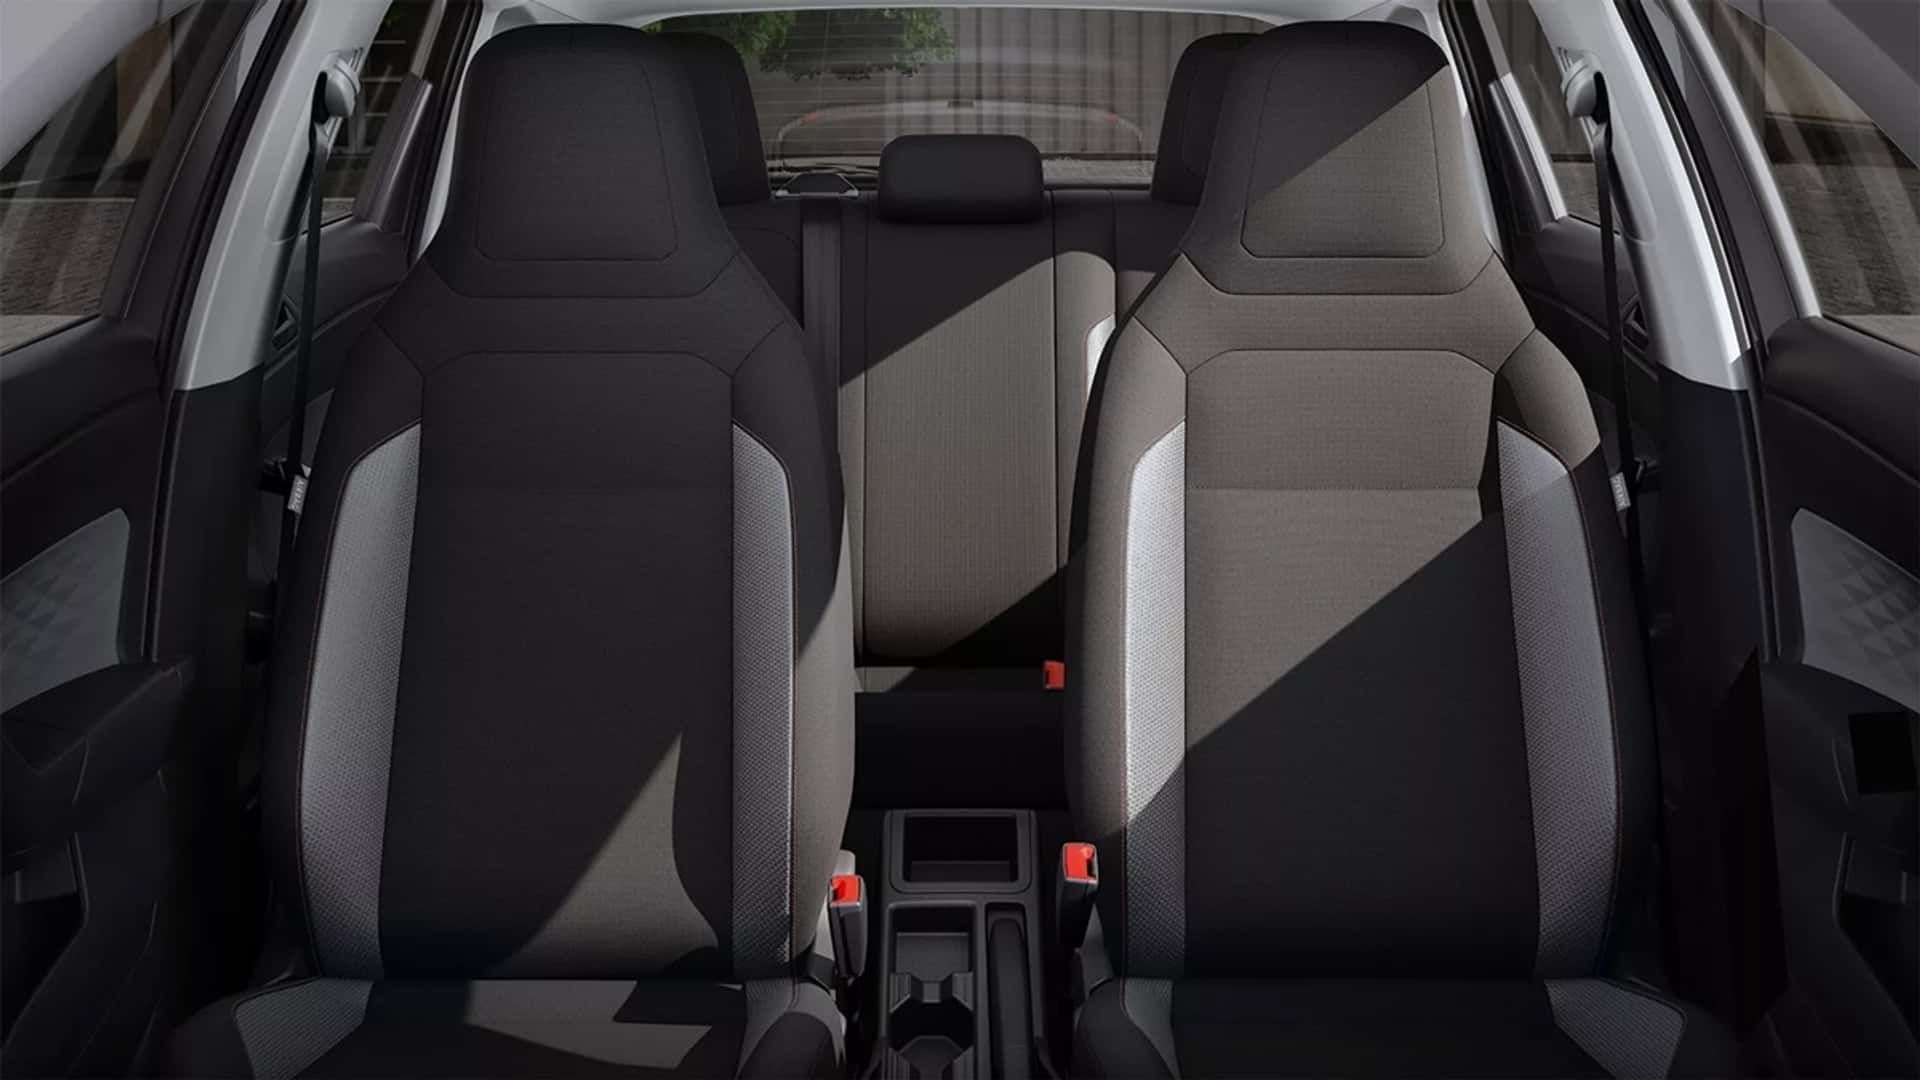 The Interior Of The Volkswagen Polo Robust